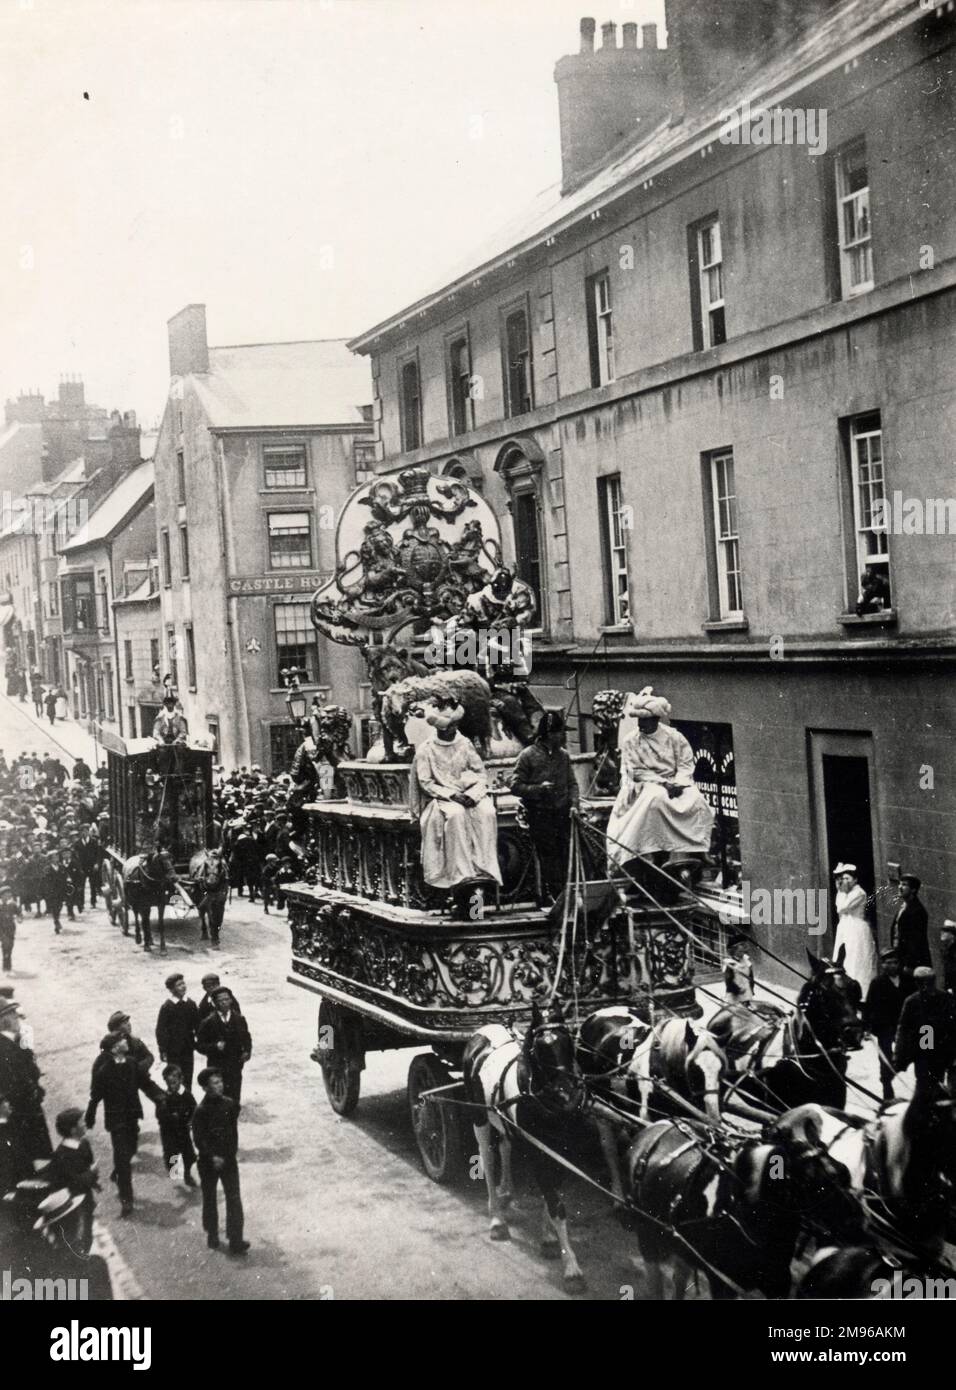 Street scene, showing Sanger's Circus visiting Haverfordwest, Pembrokeshire, Dyfed, South Wales.  There are two elaborate horse-drawn carriages, with riders dressed in fancy costumes.  An excited group of schoolboys are following the first carriage along the road.  Sanger was a famous circus impresario, staging spectacular shows at large venues all over the country from the 1850s onwards. Stock Photo